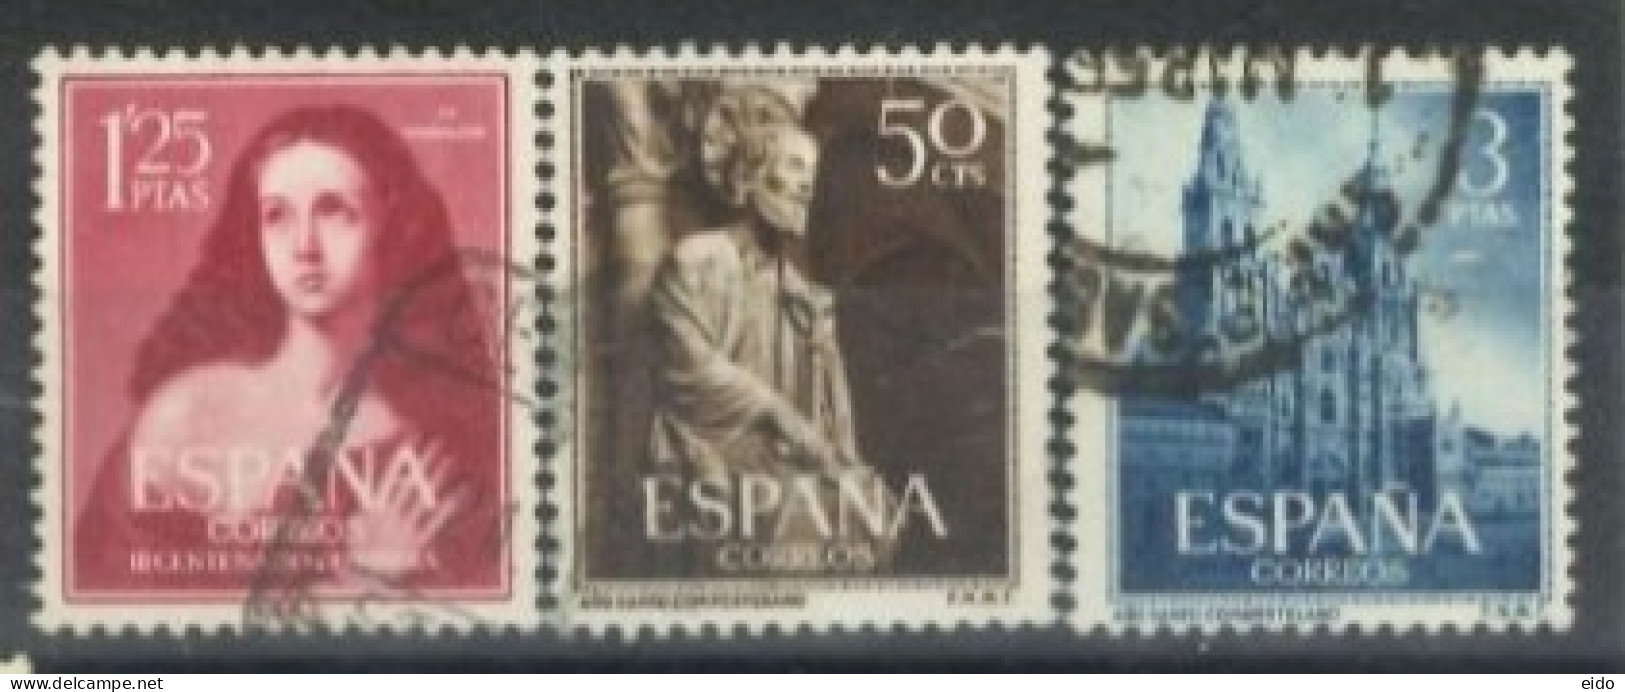 SPAIN,  1954, MAGDALENE, ST. JAMES OF COMPOSTELA AND ST. JAMES CATHEDRAL STAMPS SET OF 3, # 798/800, USED. - Gebraucht